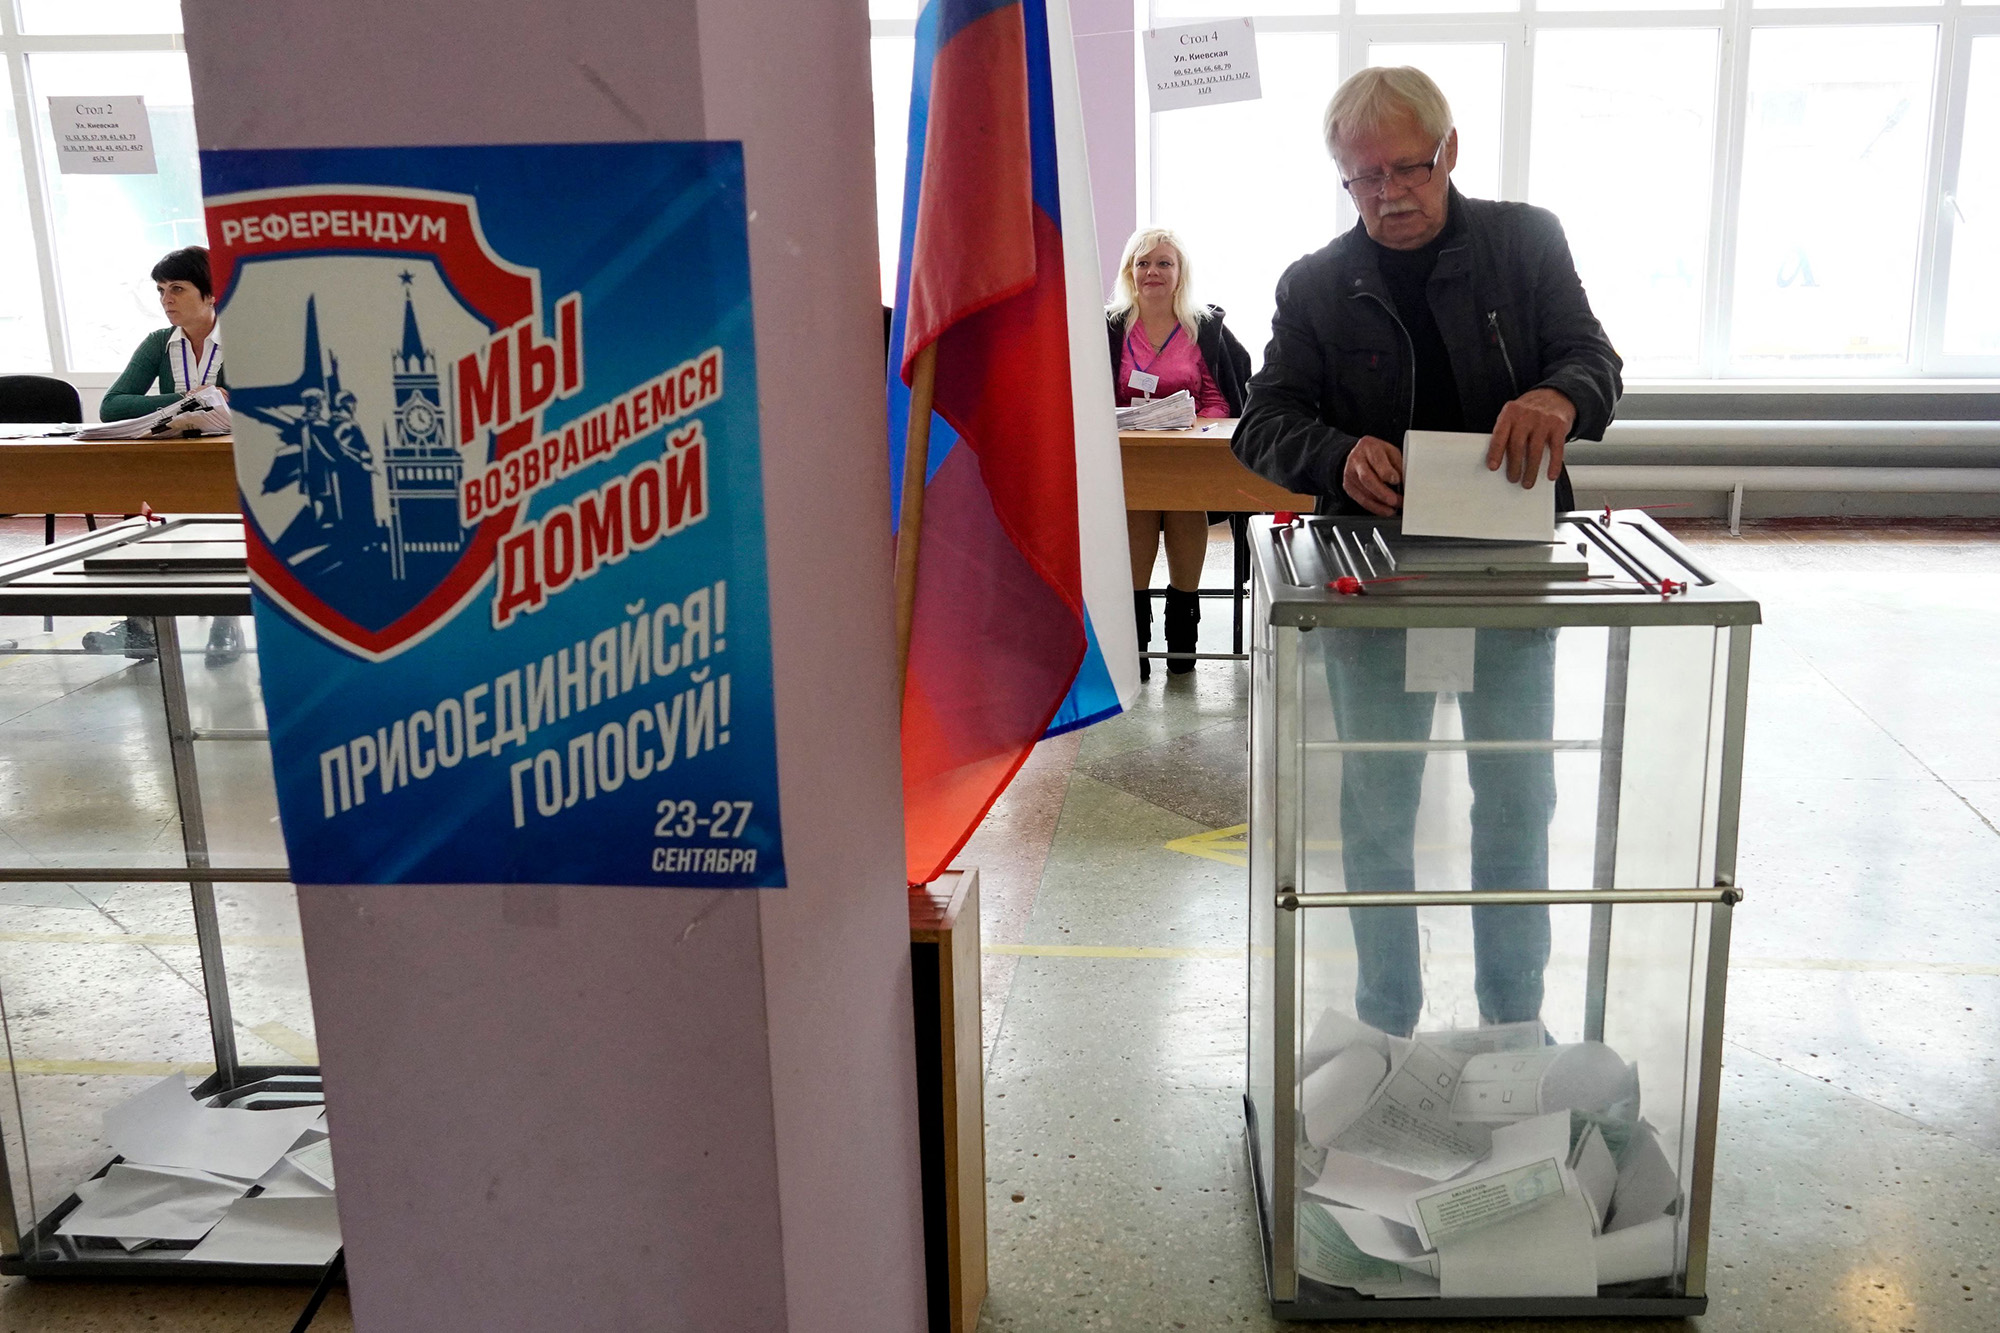 A man casts his ballot for a referendum at a polling station in Mariupol on September 27. The placard reads "Referendum. We are returning home. Join! Vote!". 